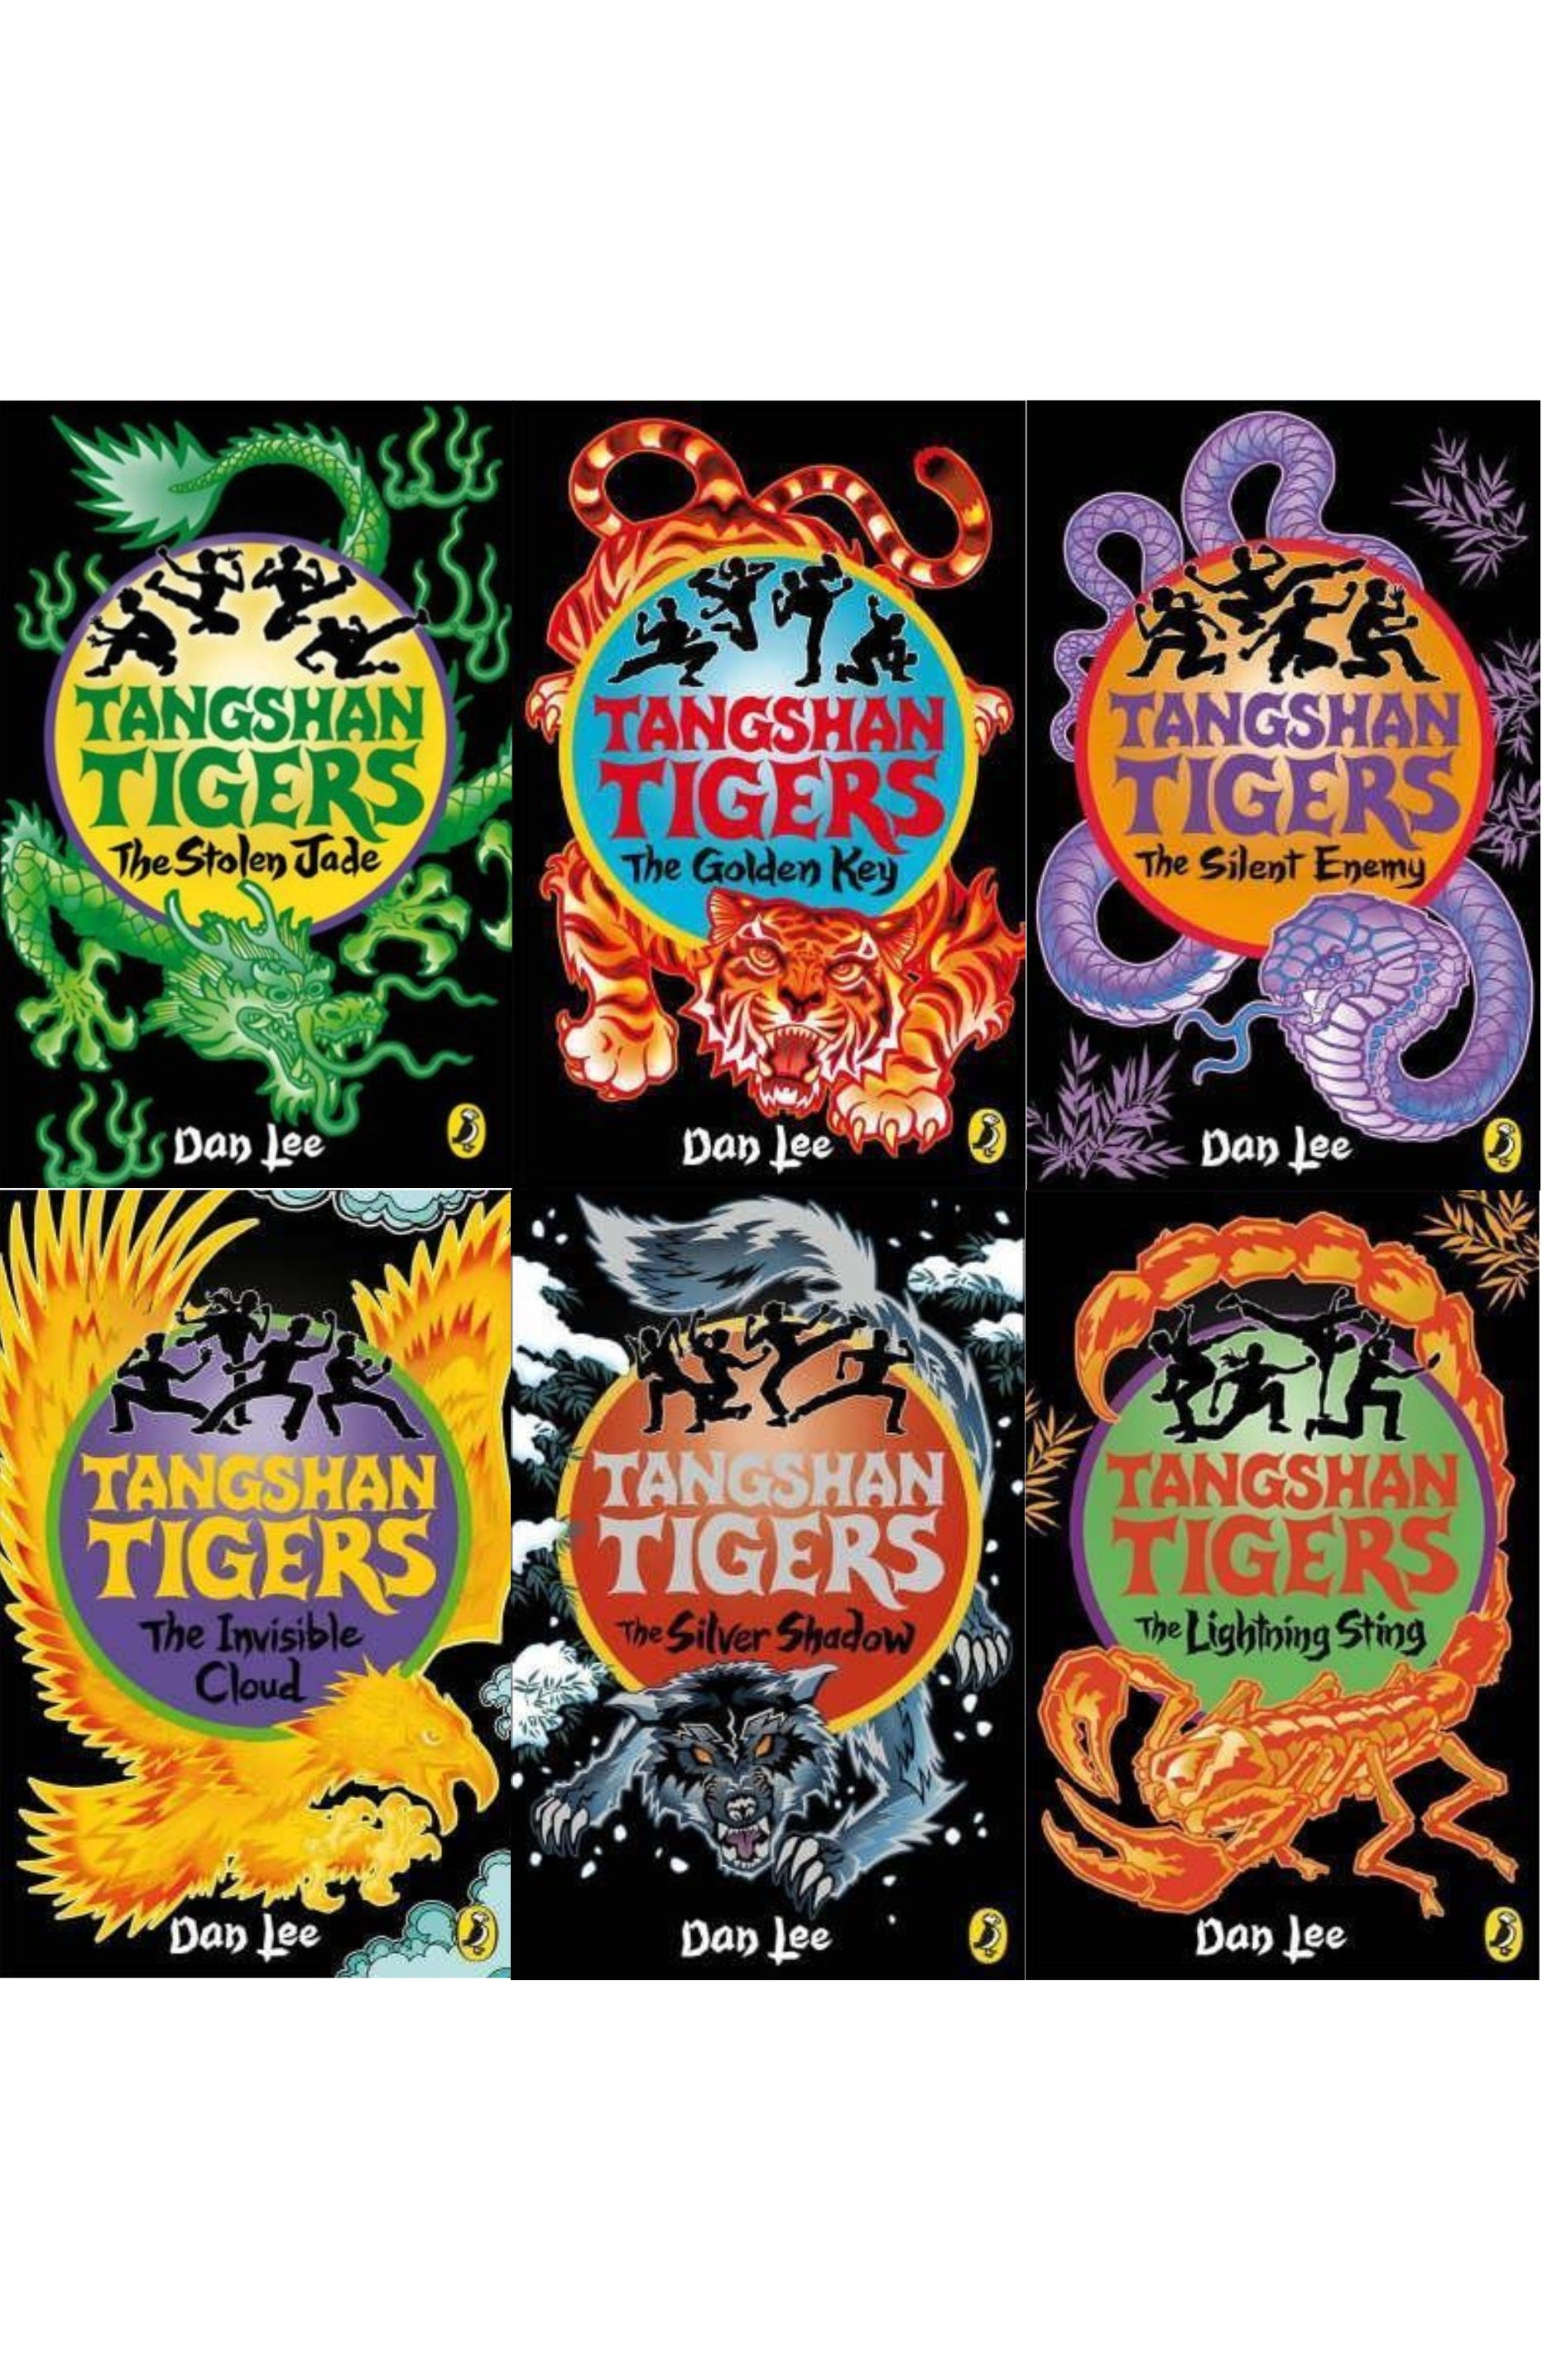 Tangshan Tigers: Dan Lee Bestseller Bok Set  ( The Silver Shadow, The Golden Key, The Invisible Cloud The Silent Enemy, The Lightning Sting, The Silver Shadow )